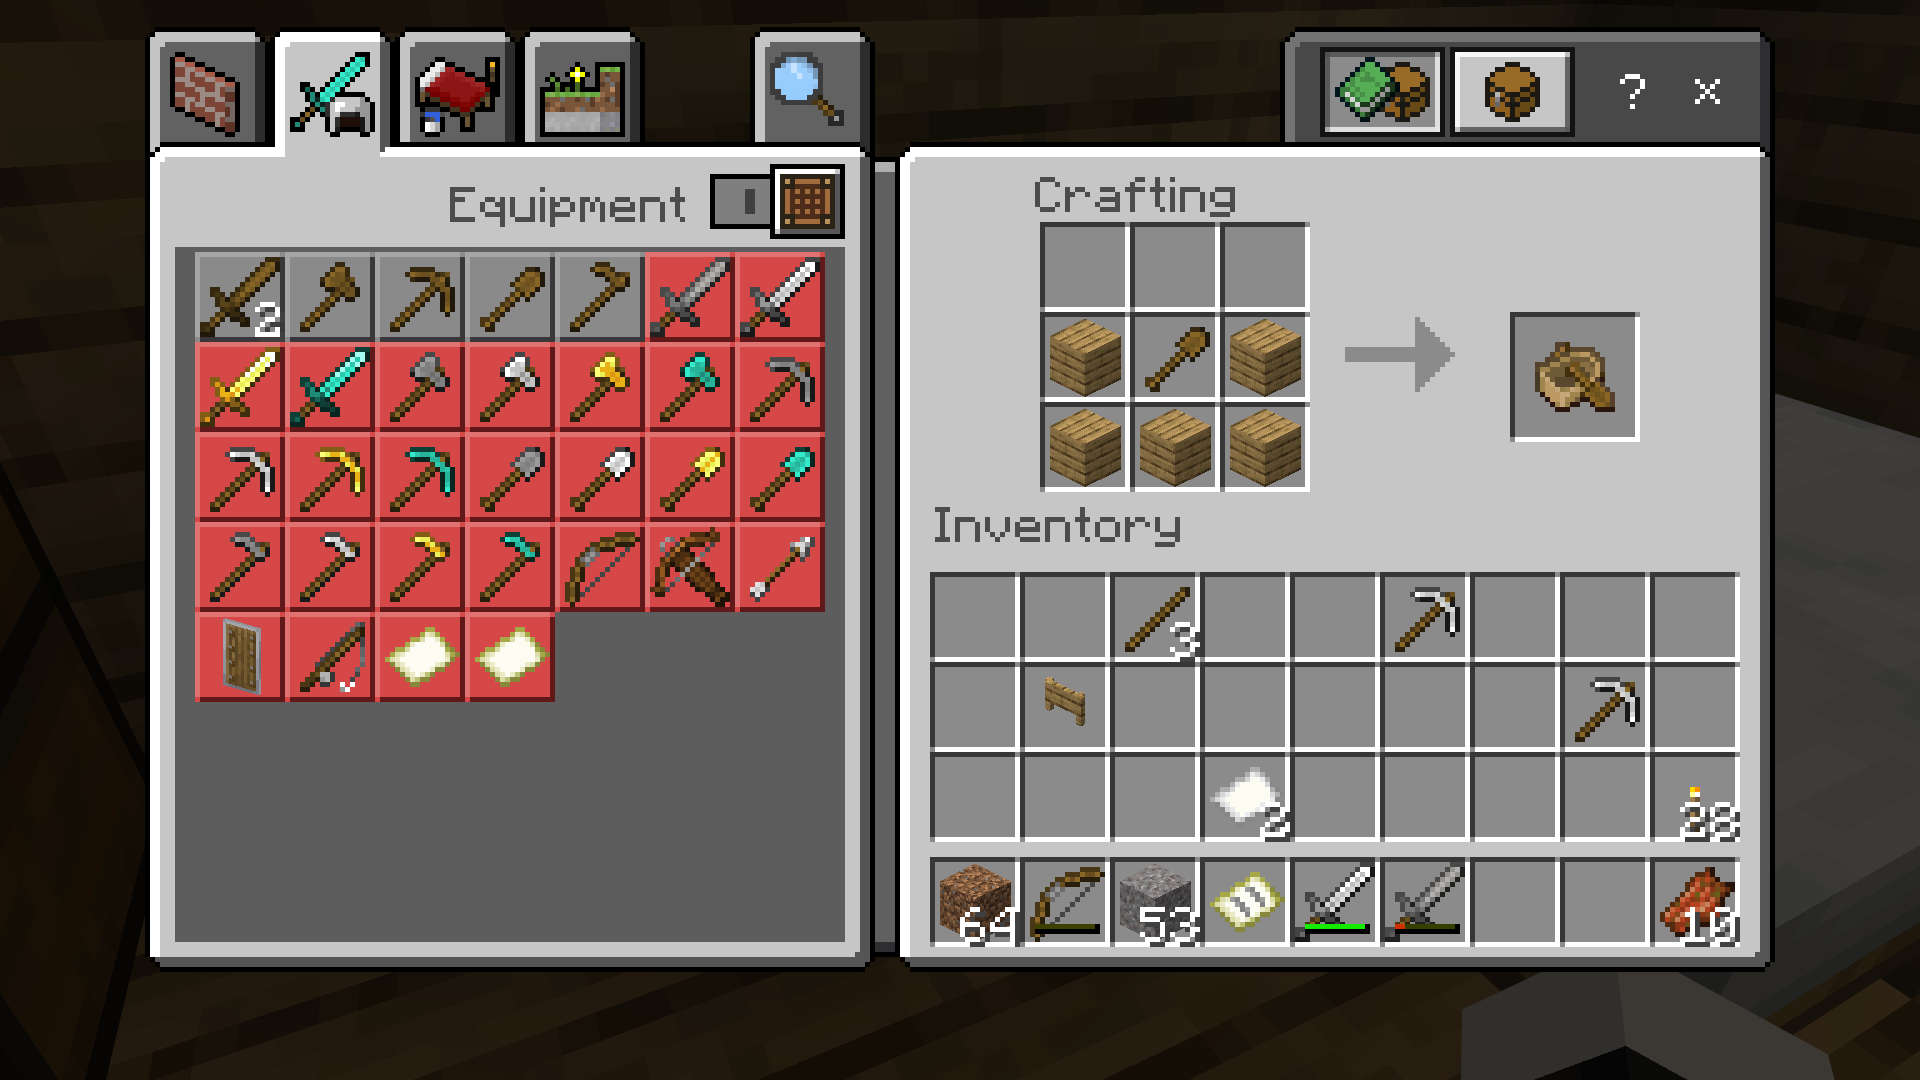 This is the boat recipe for Minecraft Bedrock version. It